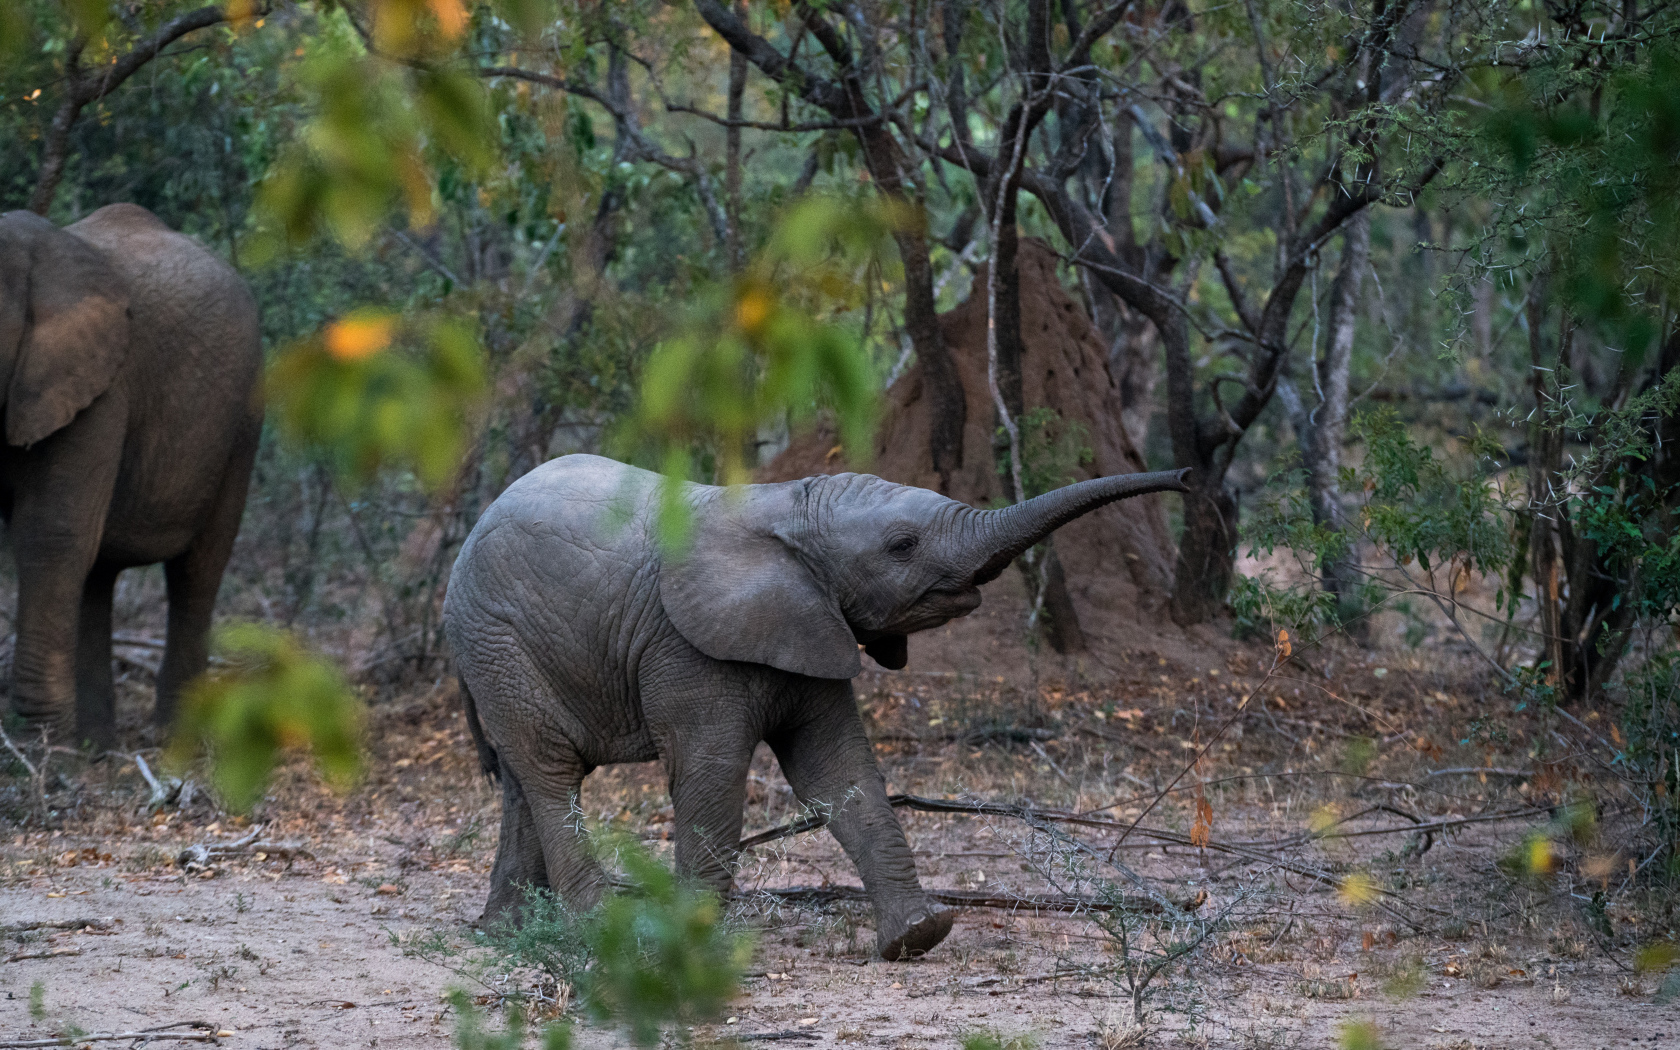 Little baby elephant in the forest